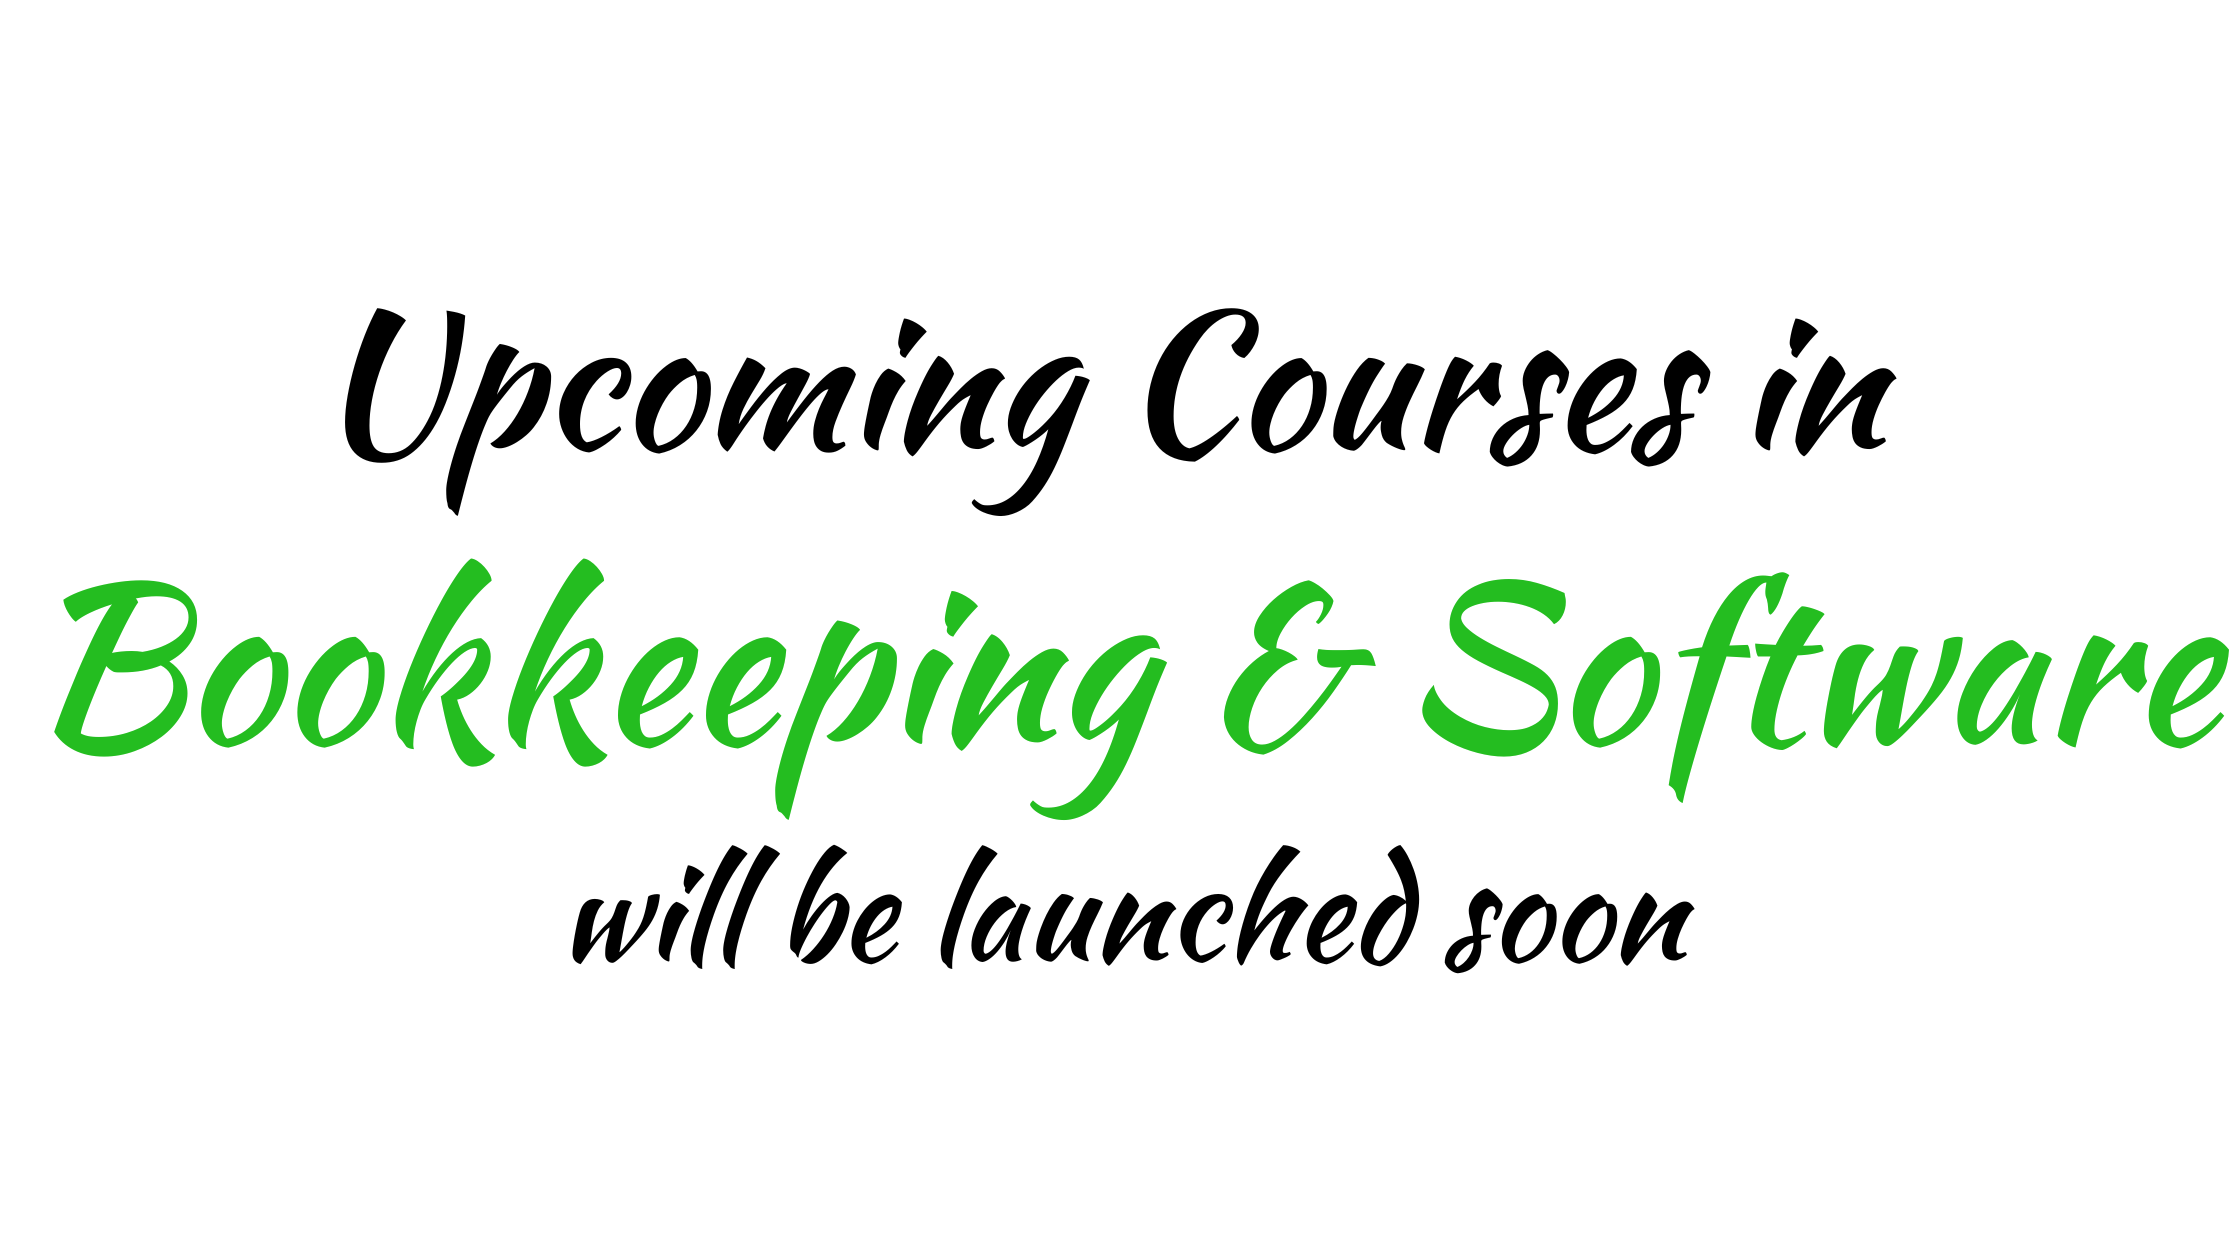 Upcoming Courses on Bookkeeping & Softwa So will be launched soon (Blog Banner)